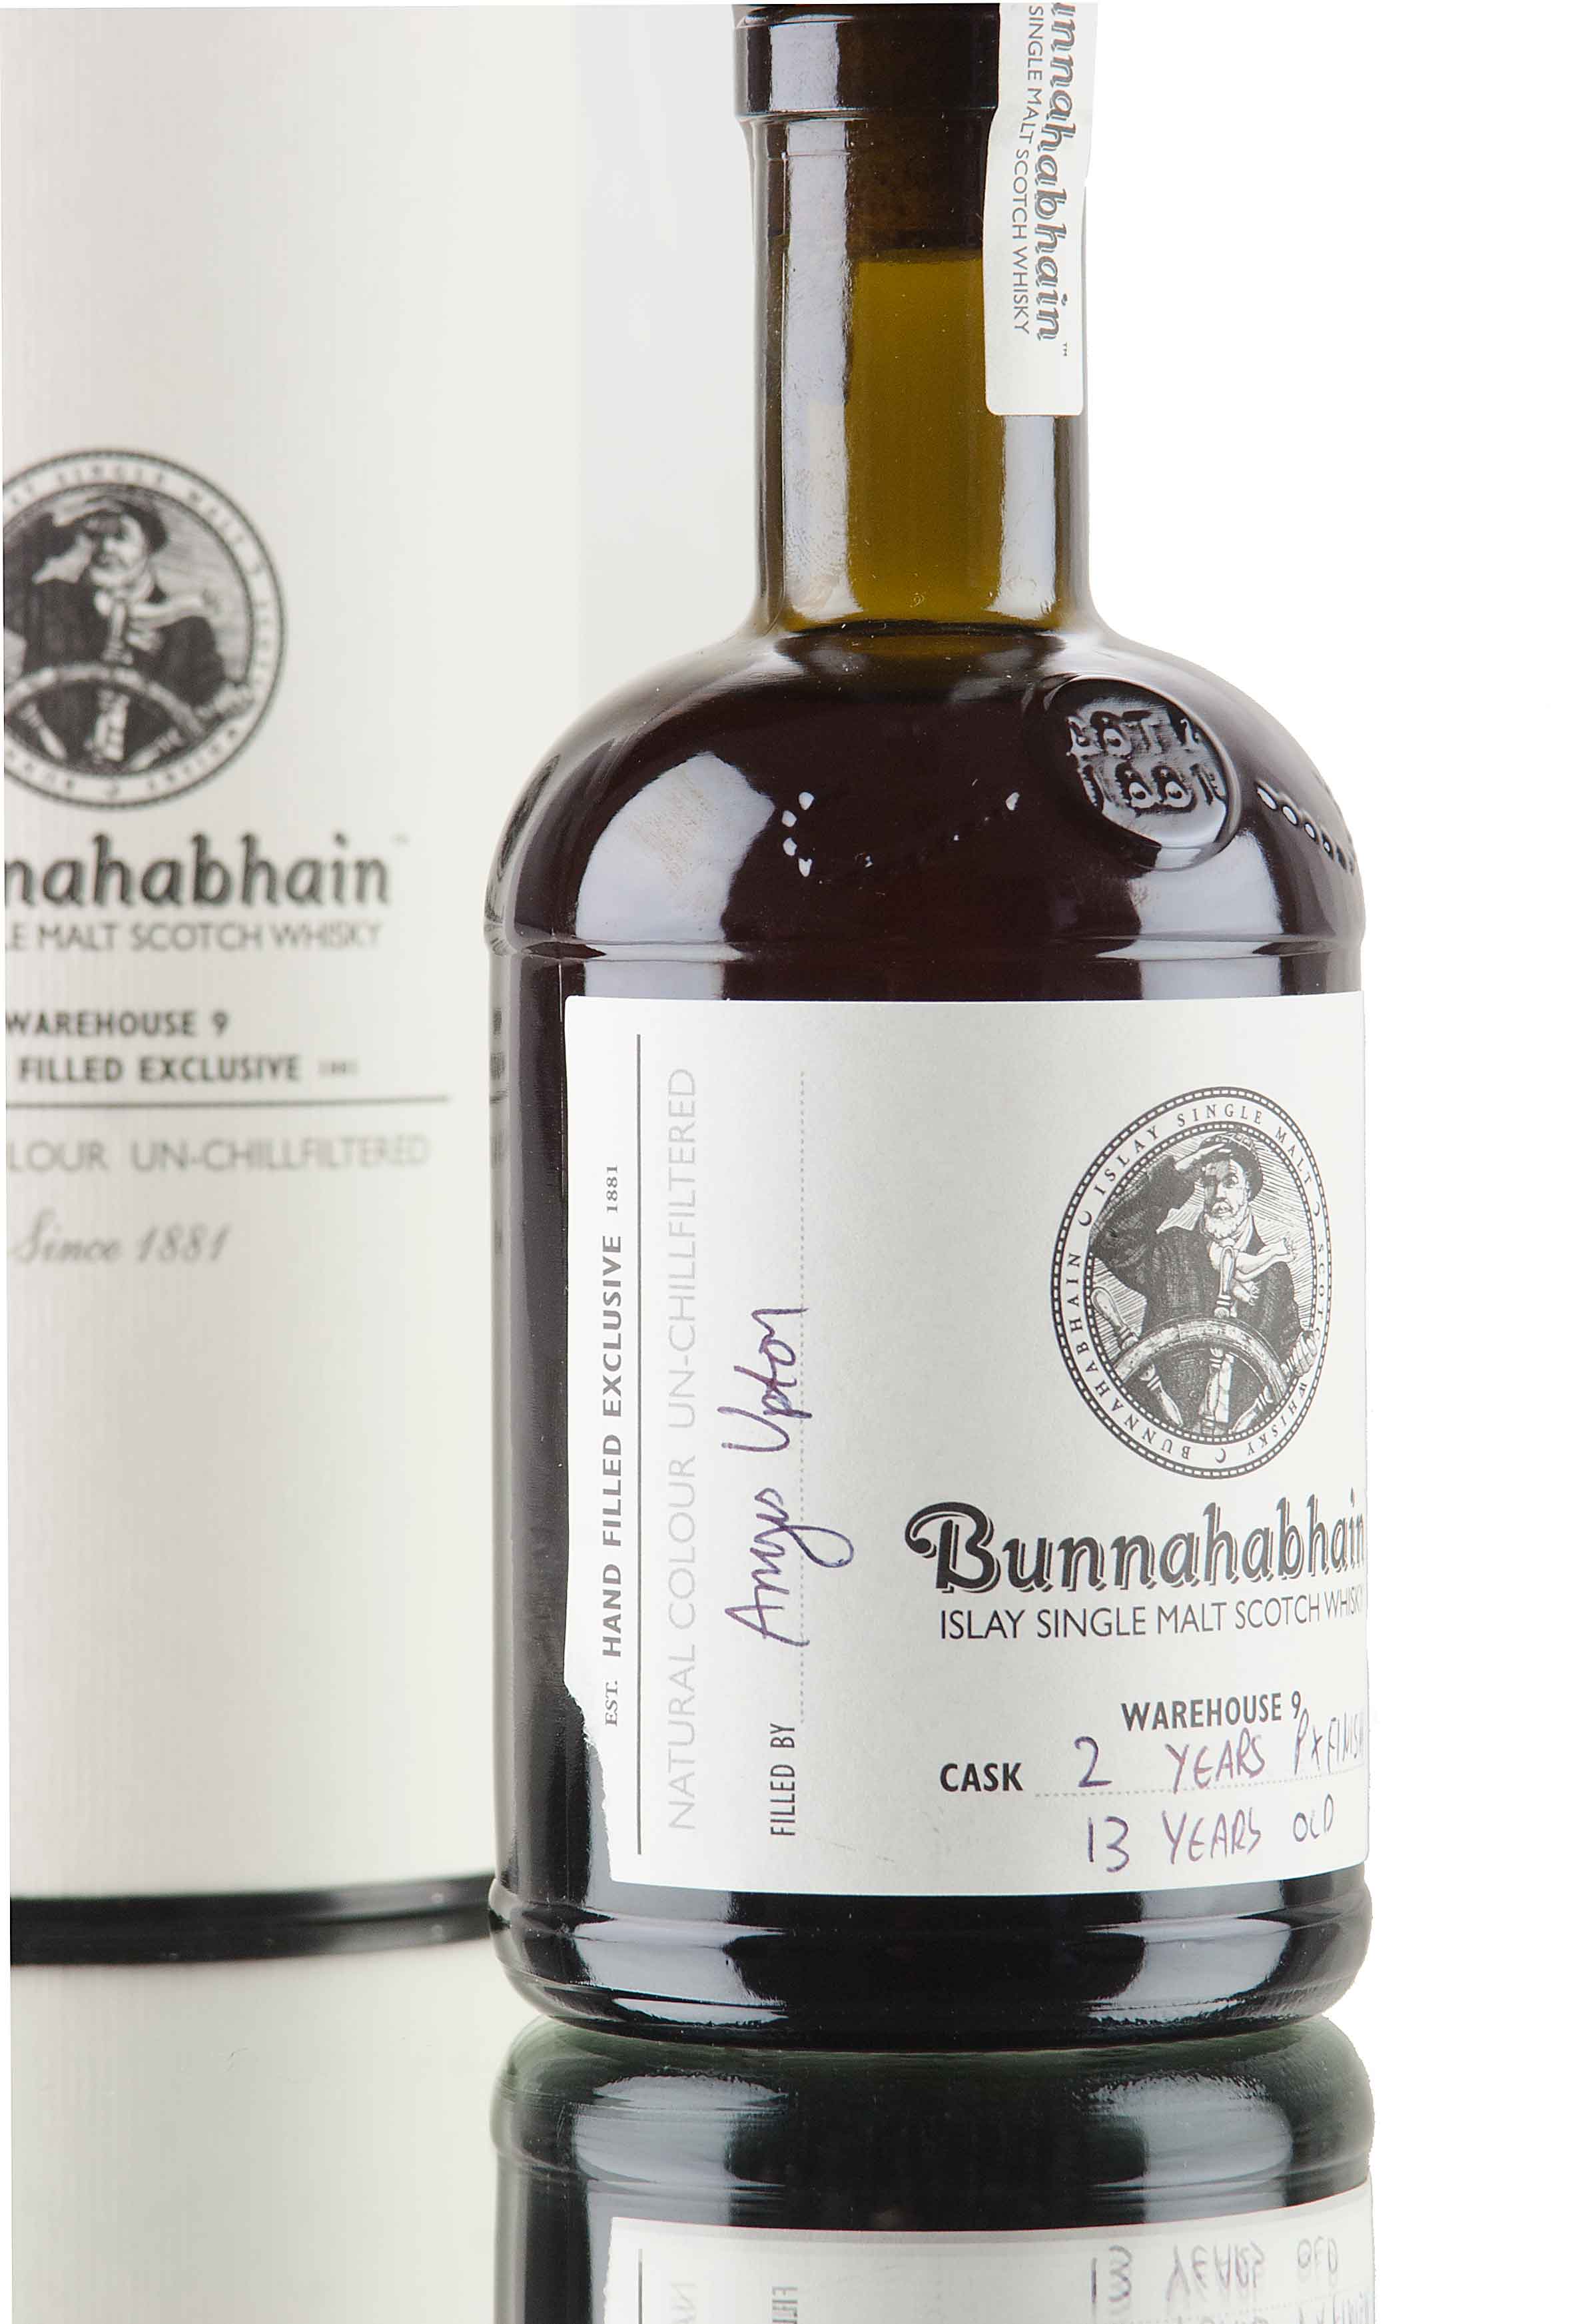 Bunnahabhain 13 Year Old - 2003 / Hand Filled Exclusive